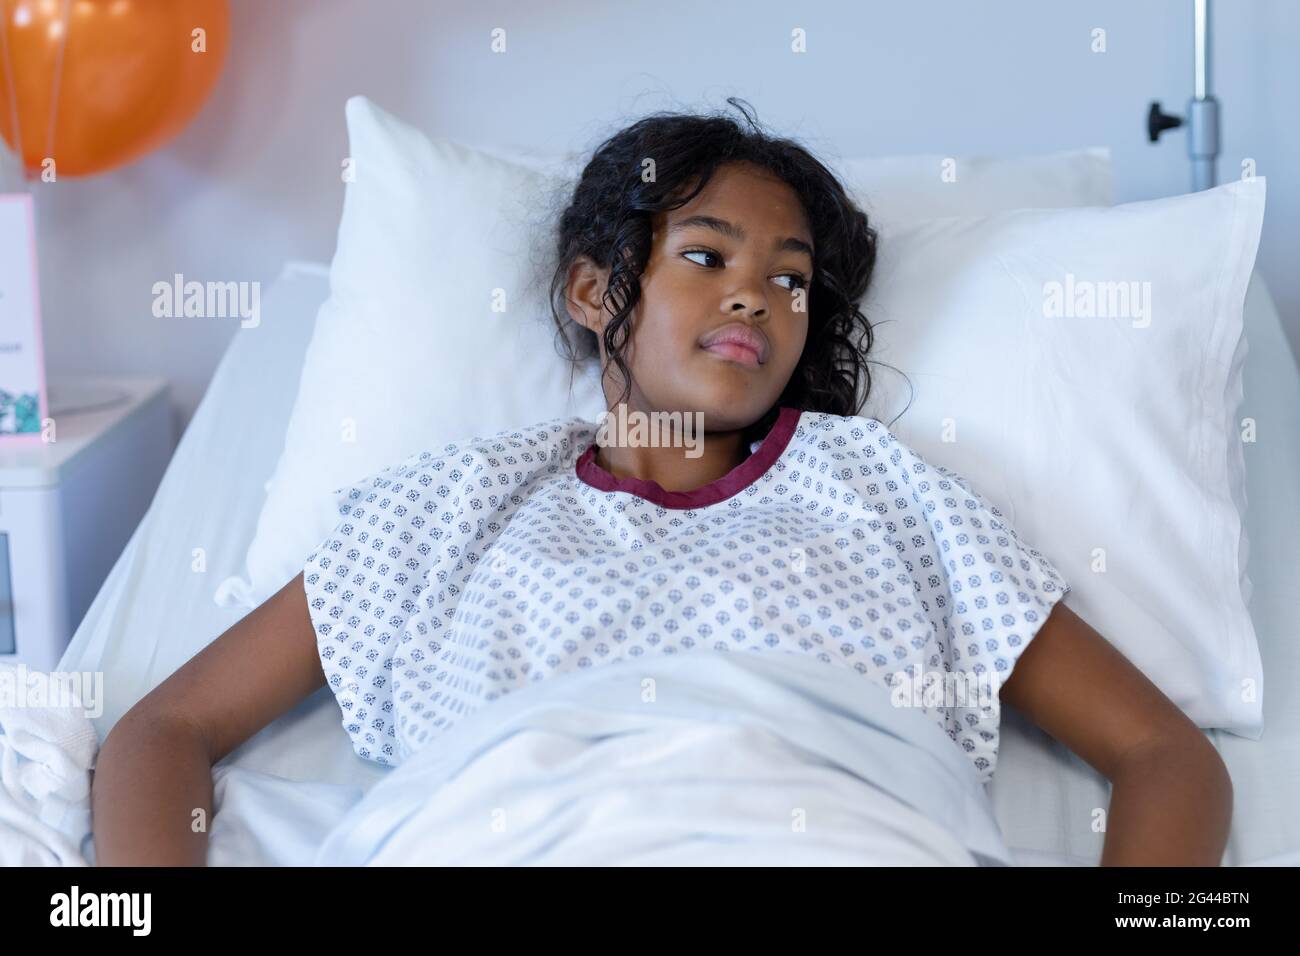 Bored sick mixed race girl lying in hospital bed looking away Stock Photo